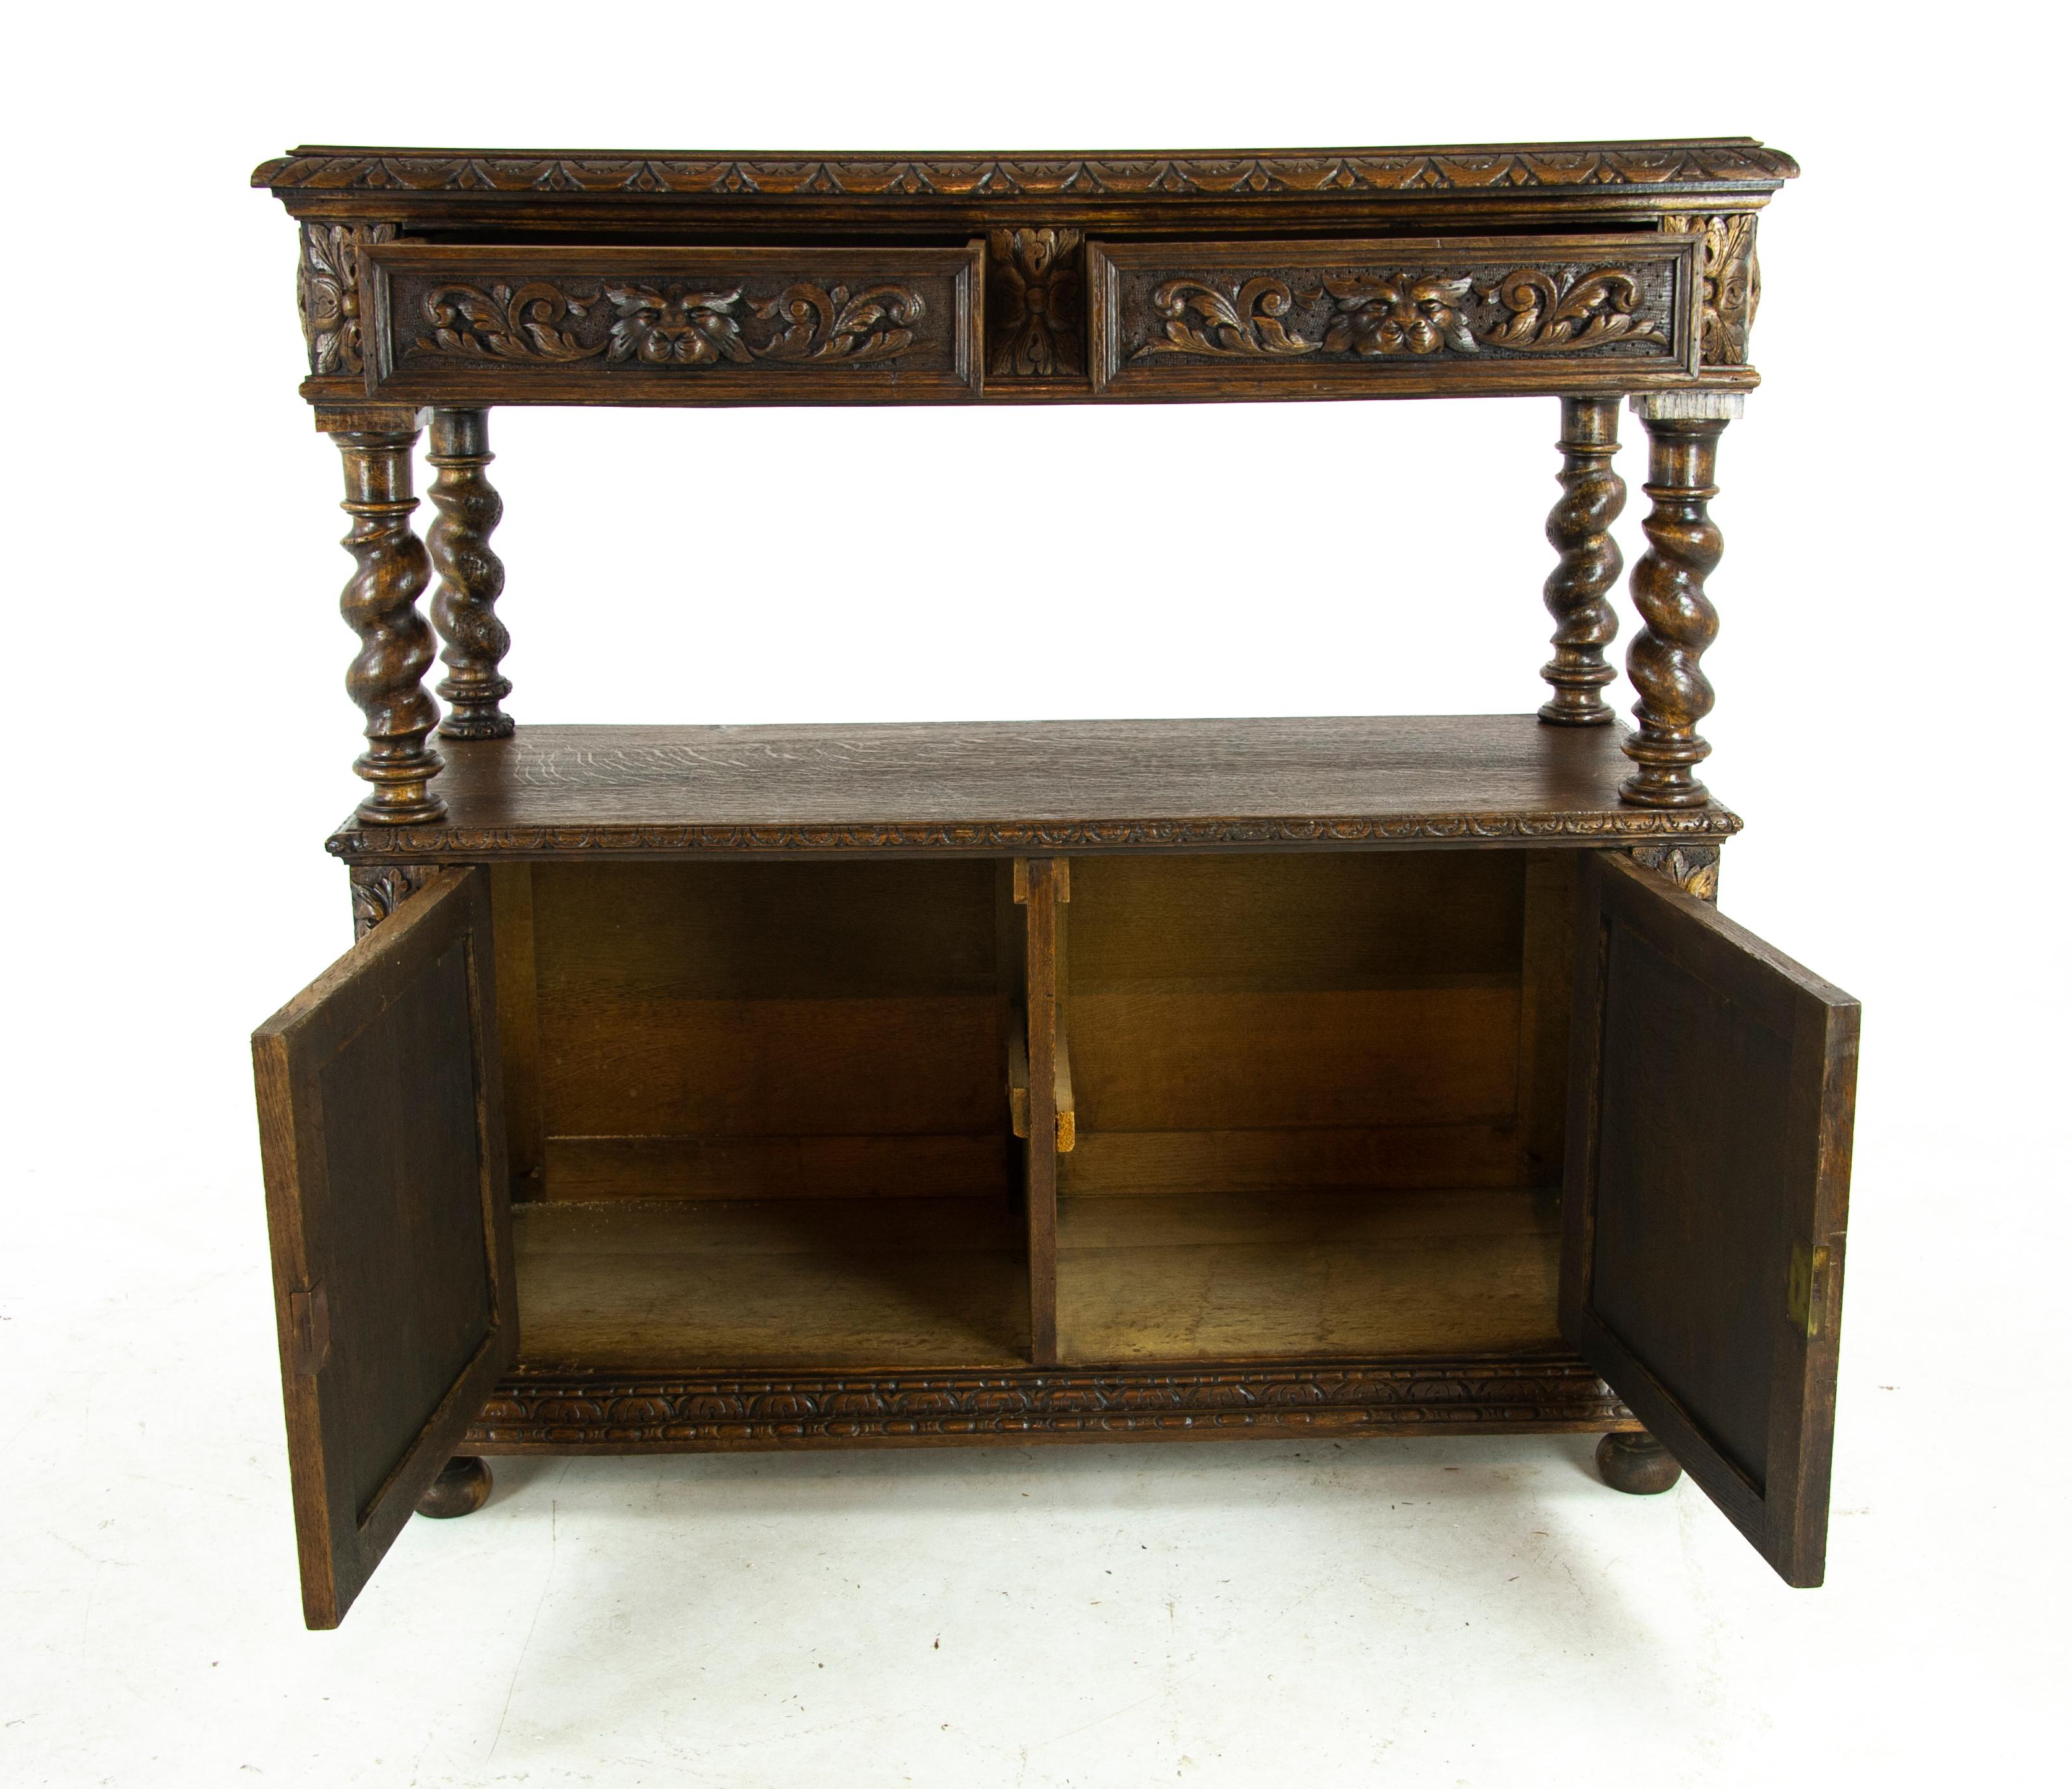 Carved oak sideboard, barley twist buffet, dumb waiter, Scotland, 1870, Antique Furniture, B1489, 

Scotland 1870
Rectangular top
Carved molded edge
Pair of carved drawers with griffin mask handles and leaves
Four thick barley twist